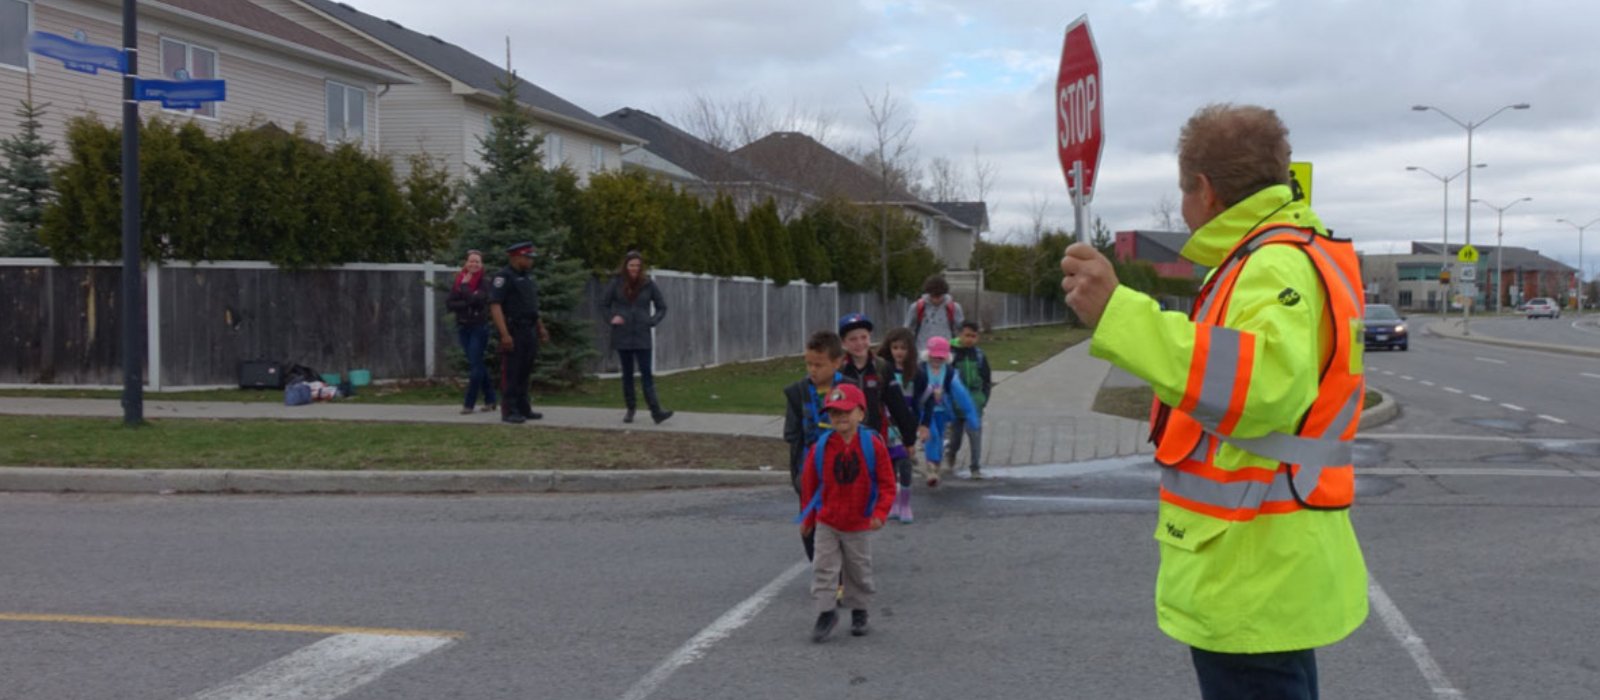 A crossing guard helps children safely cross the street